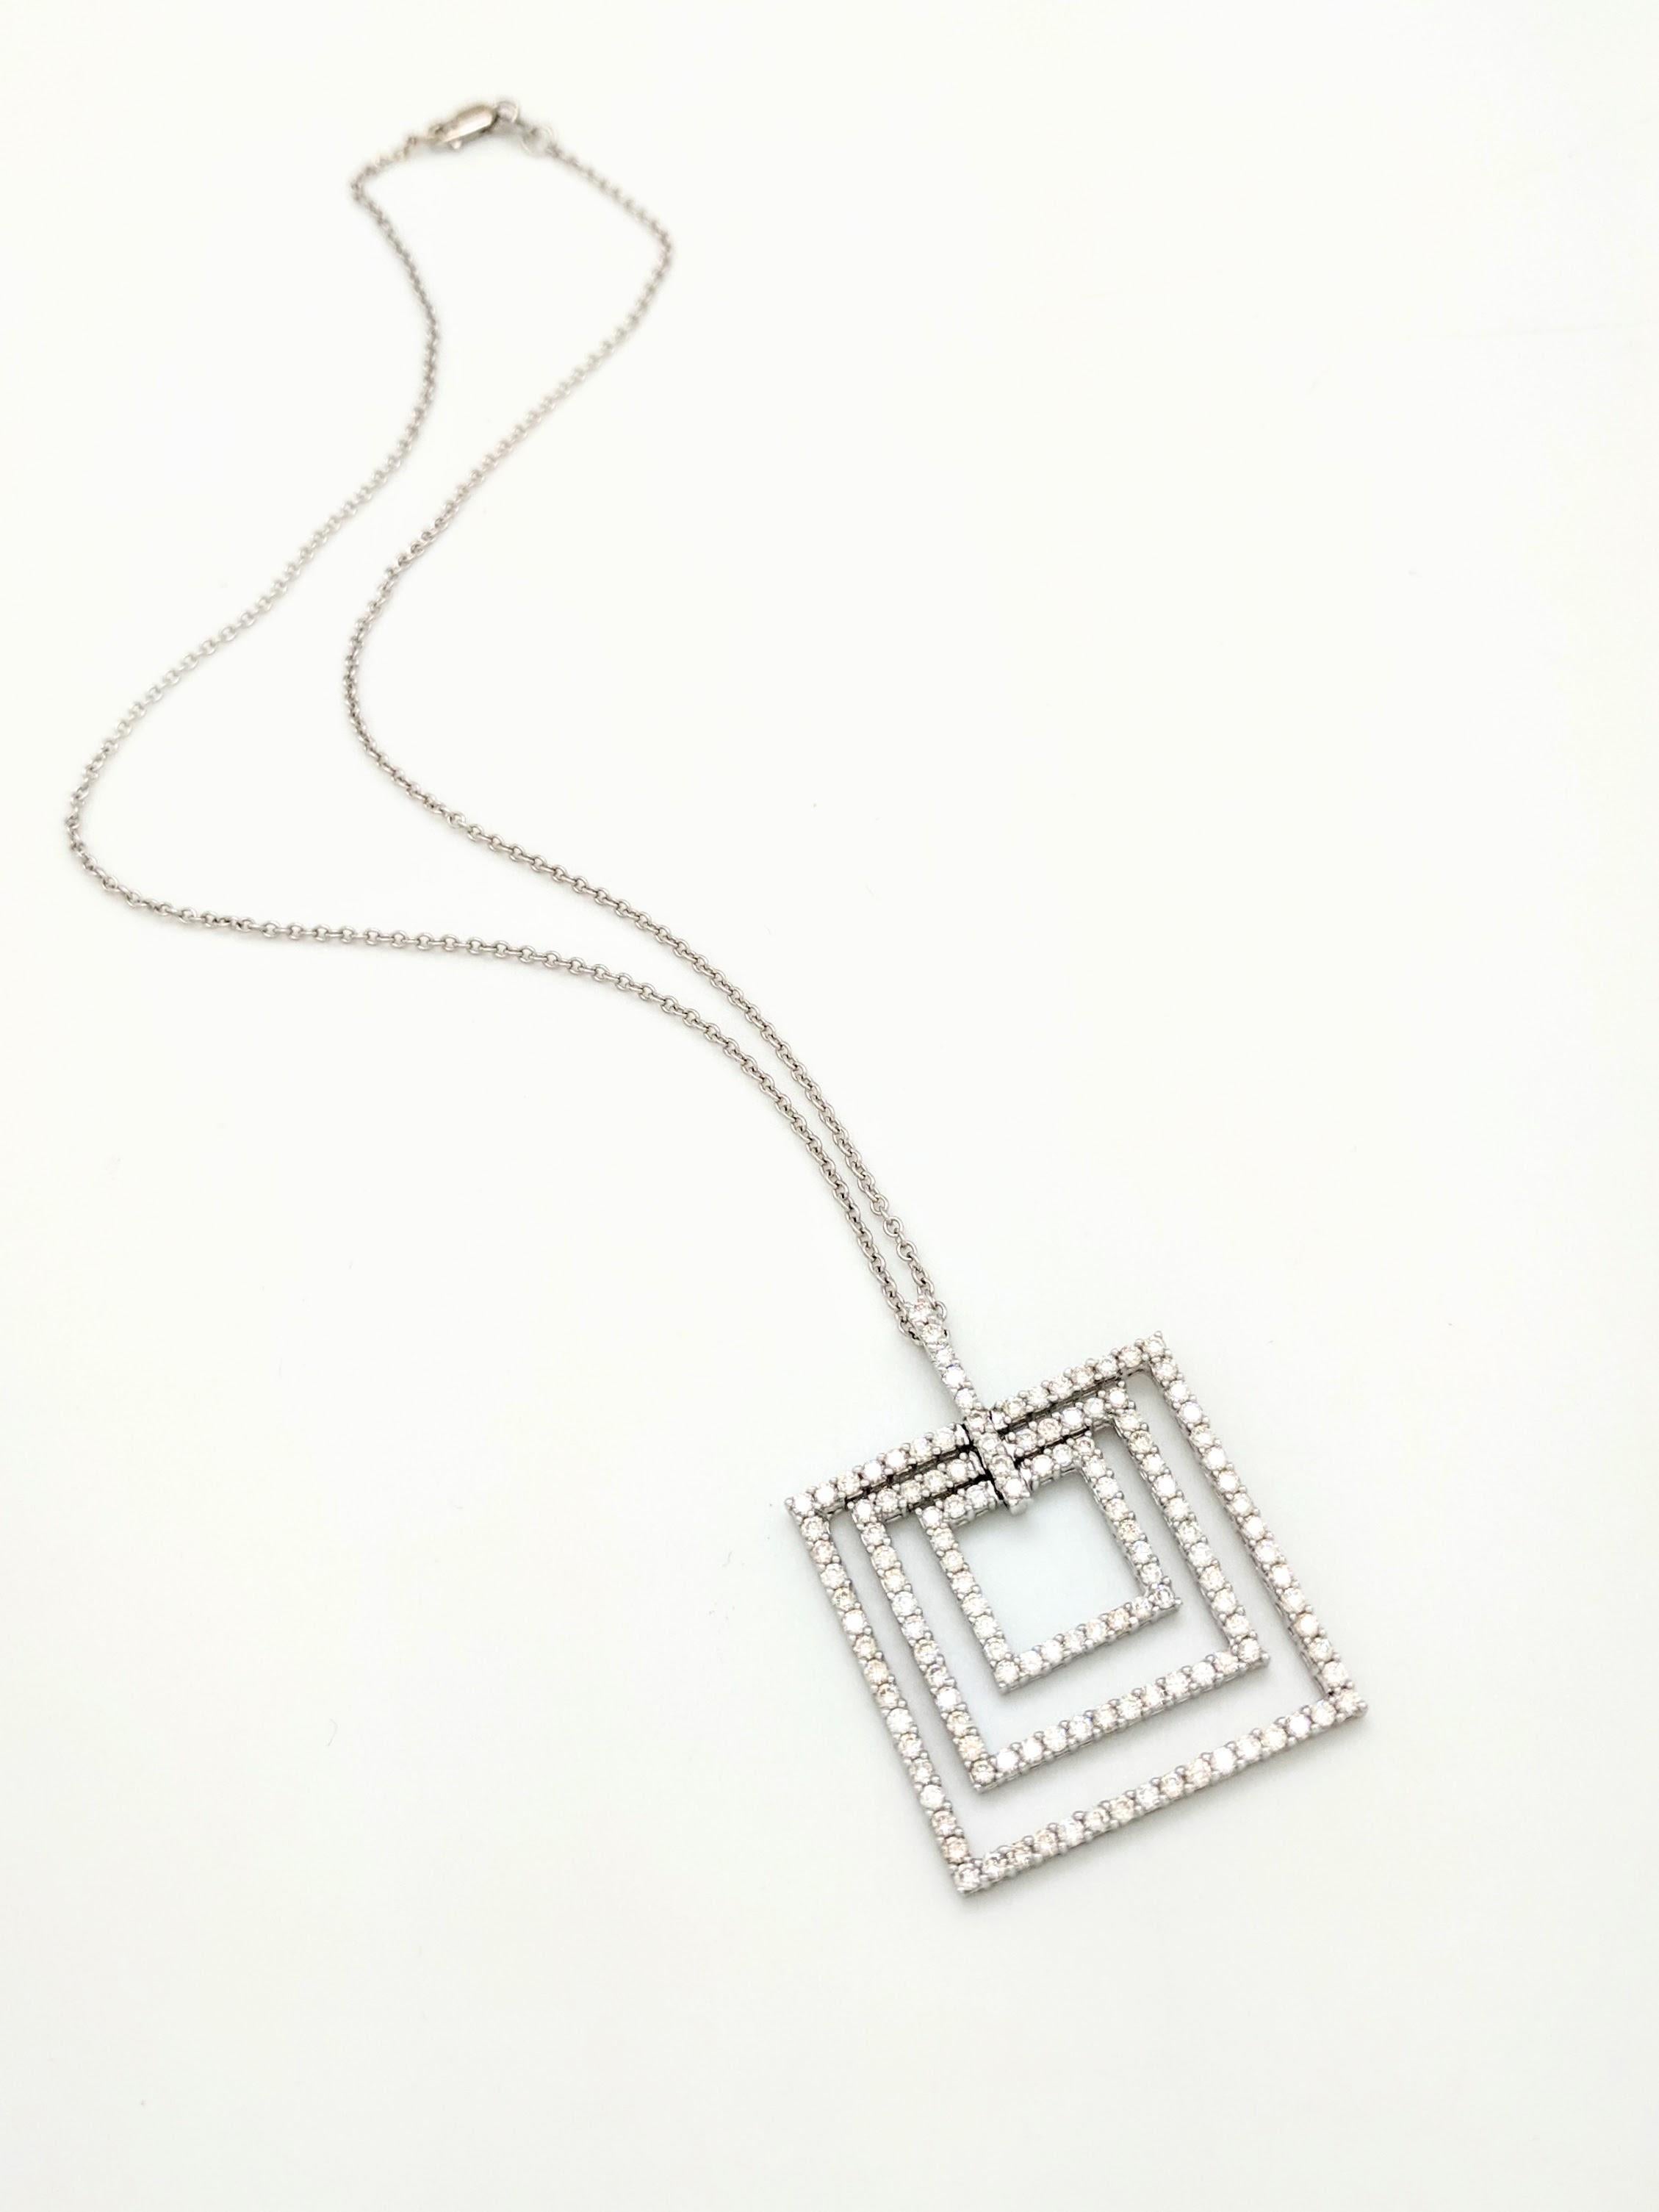 18 Karat White Gold Diamond Square Layered Pendant Necklace In Good Condition For Sale In Gainesville, FL